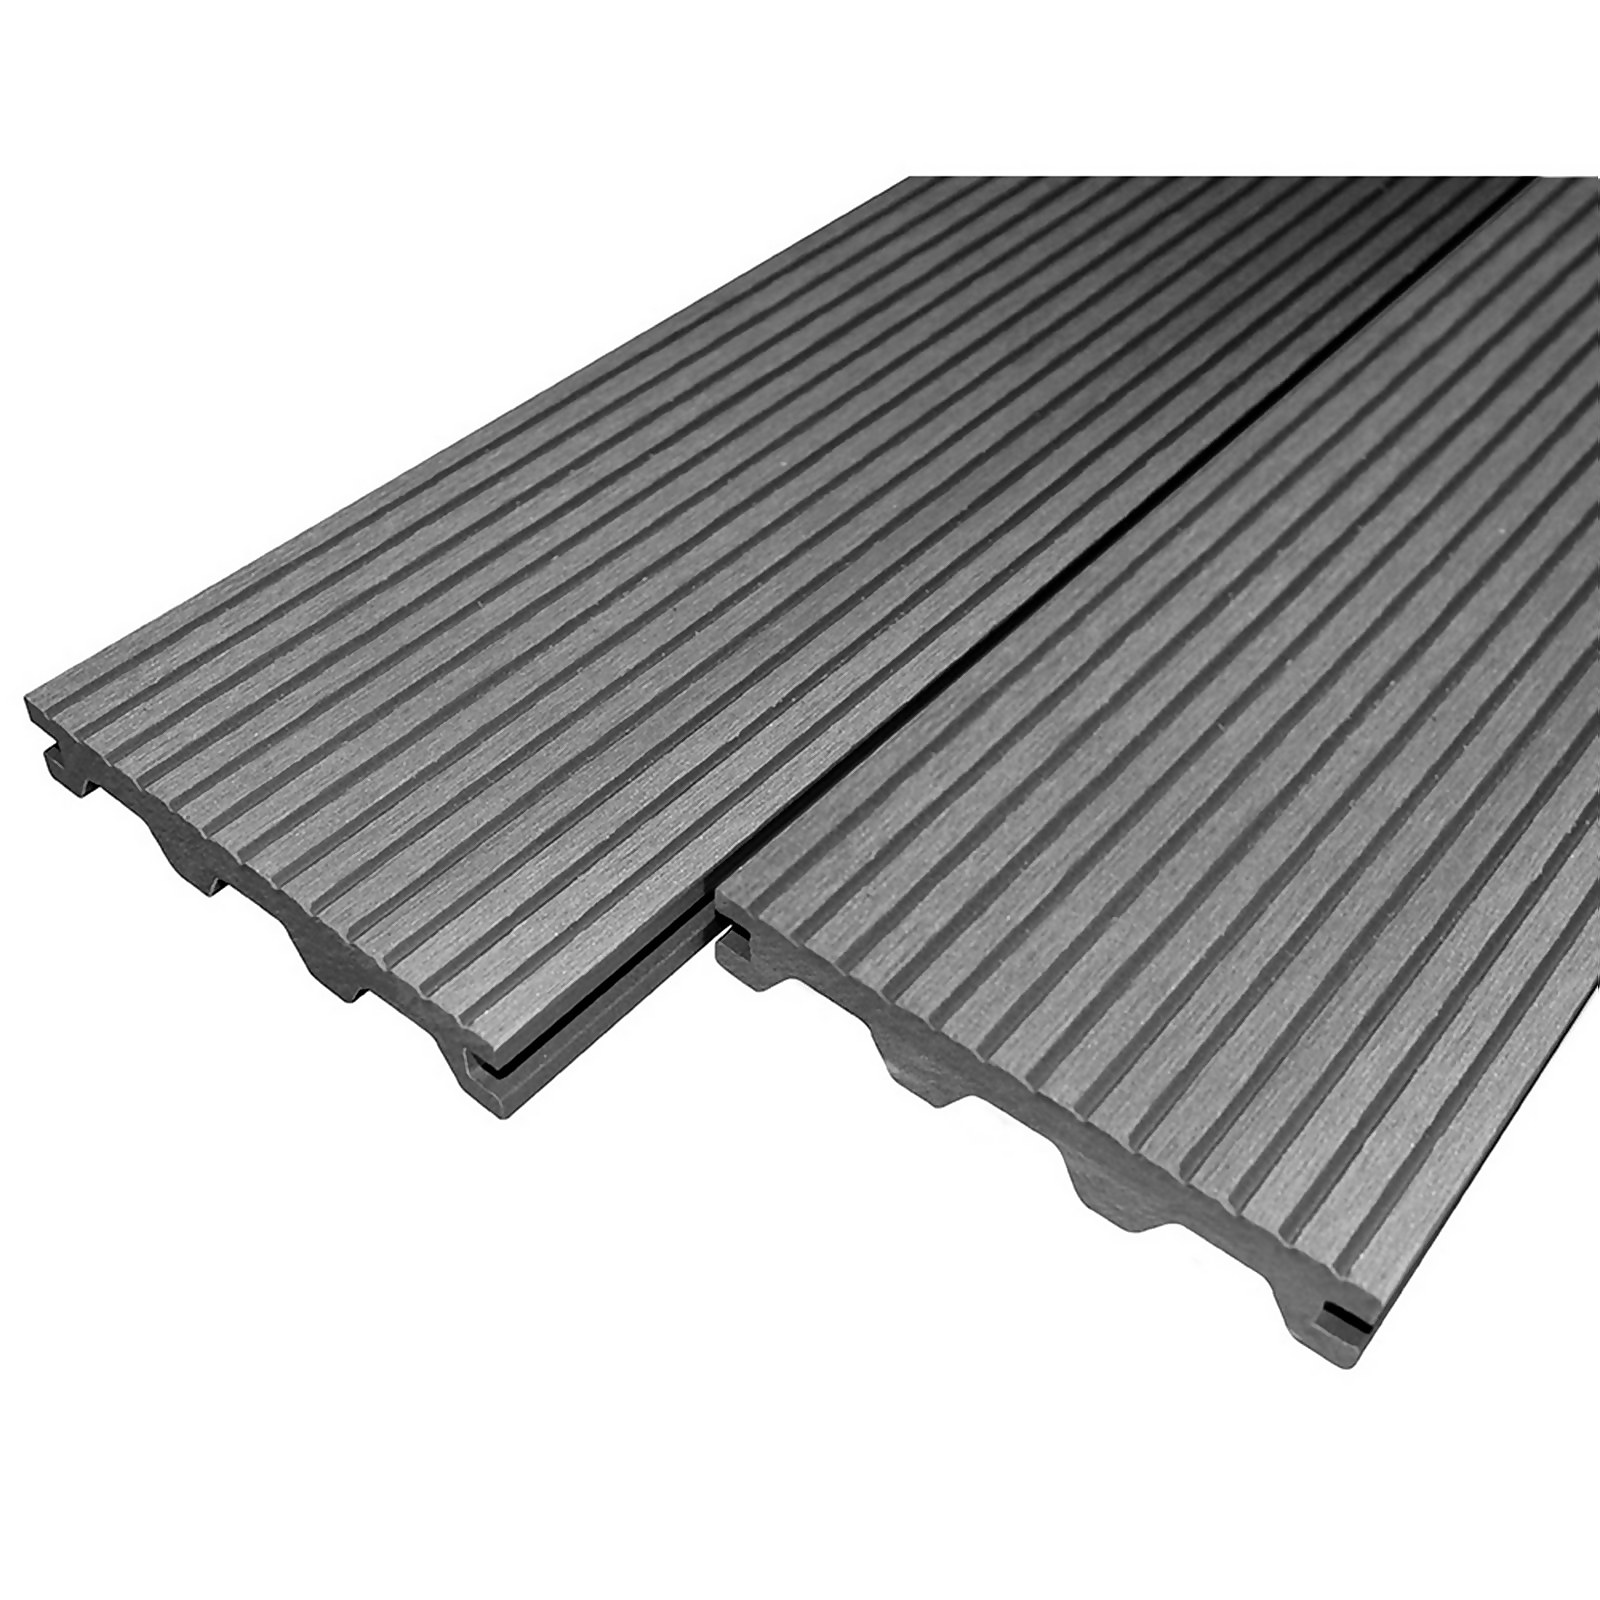 Photo of Victoria Composite Decking Castle Groove 40 Pack Grey - 20.16 M2